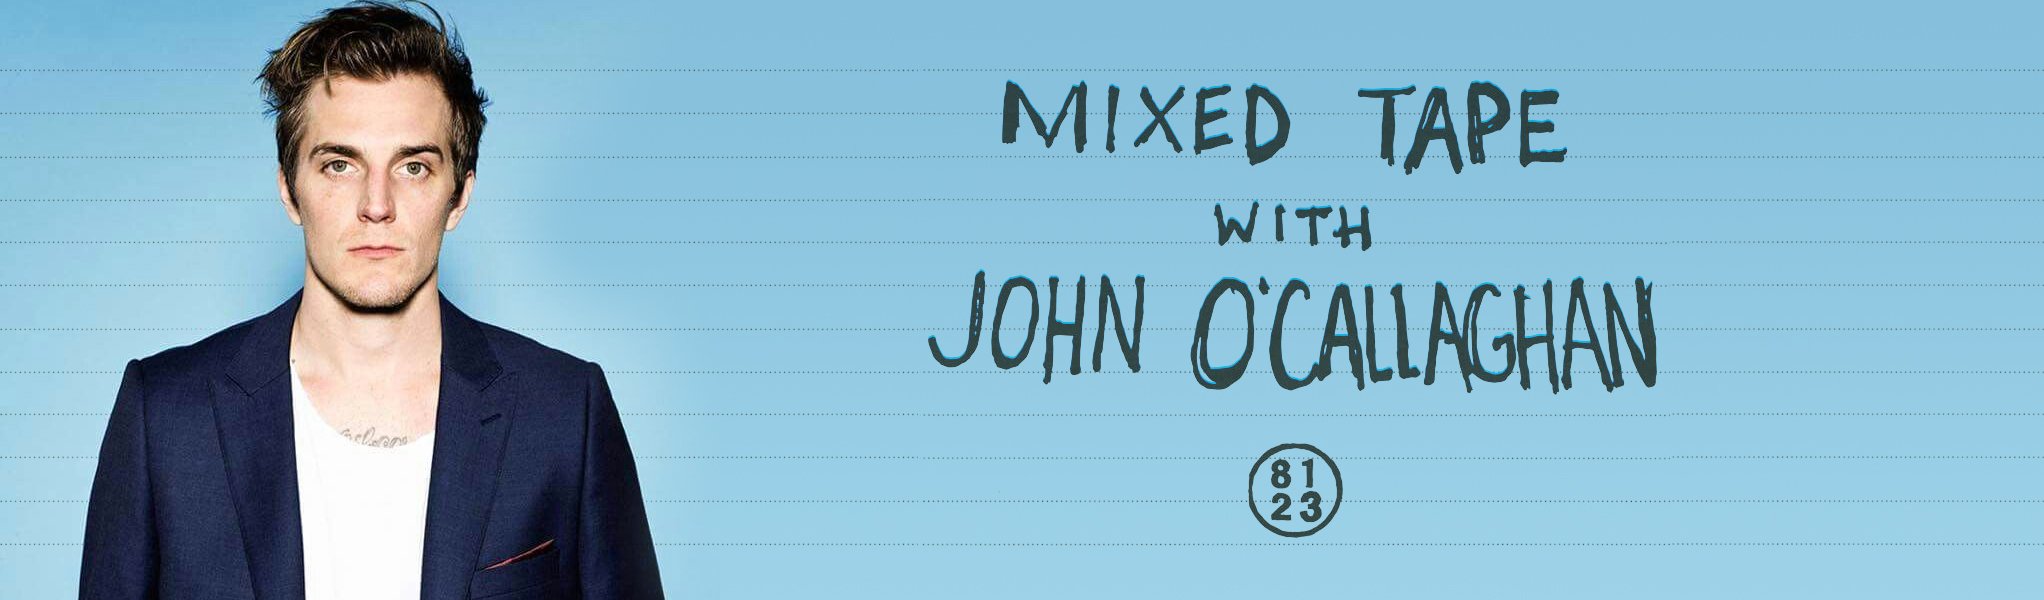 mixed-tape-with-john-ocallaghan